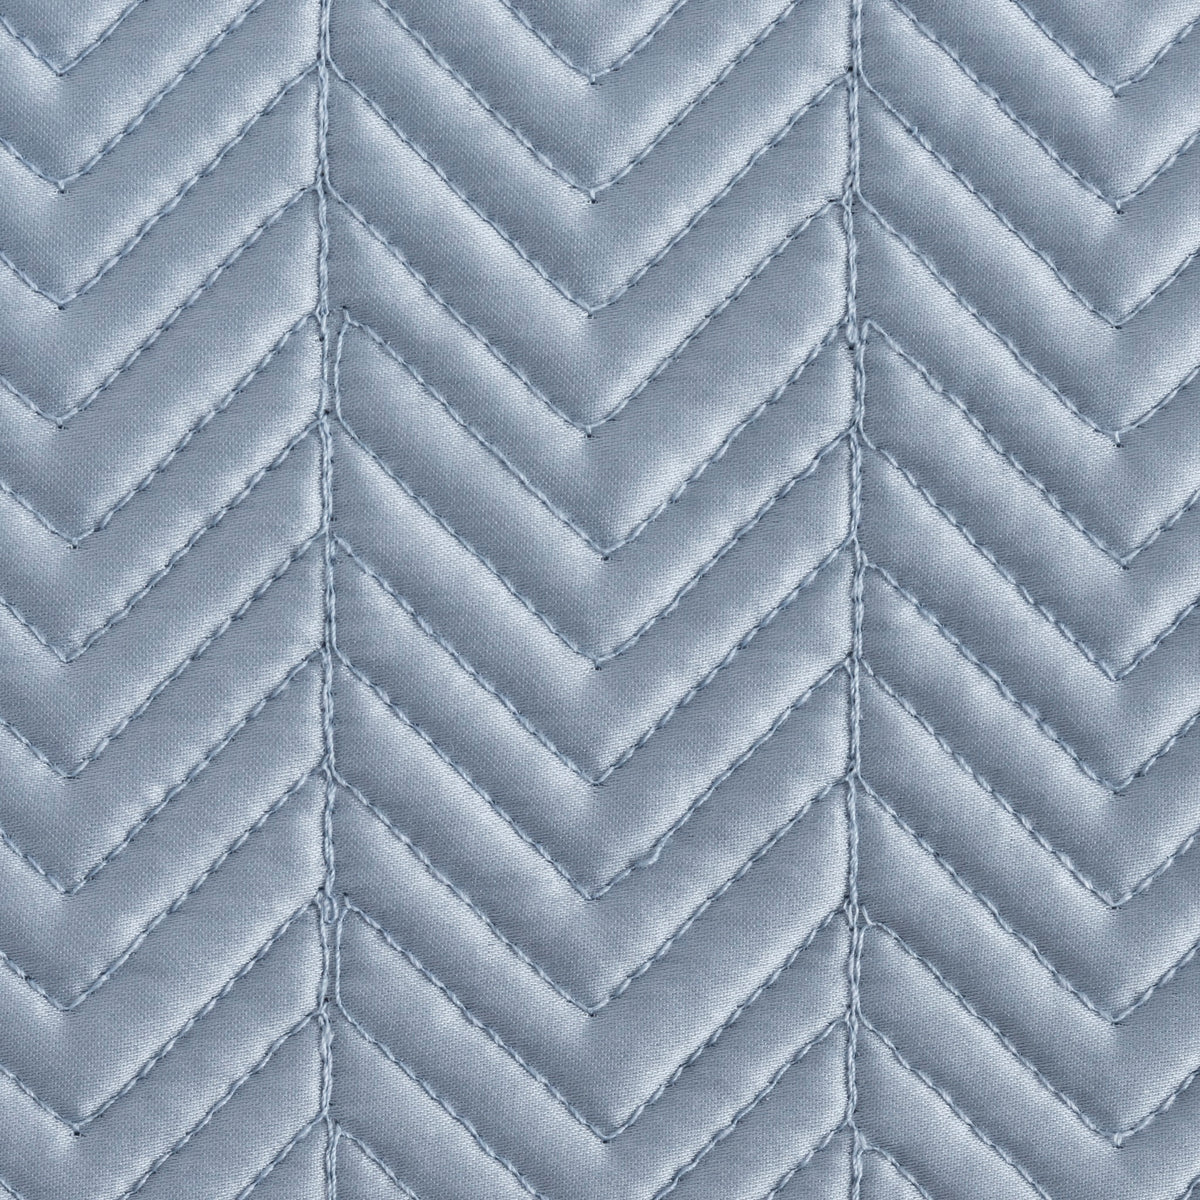 Swatch Sample of Matouk Netto Bedding in Hazy Blue Color